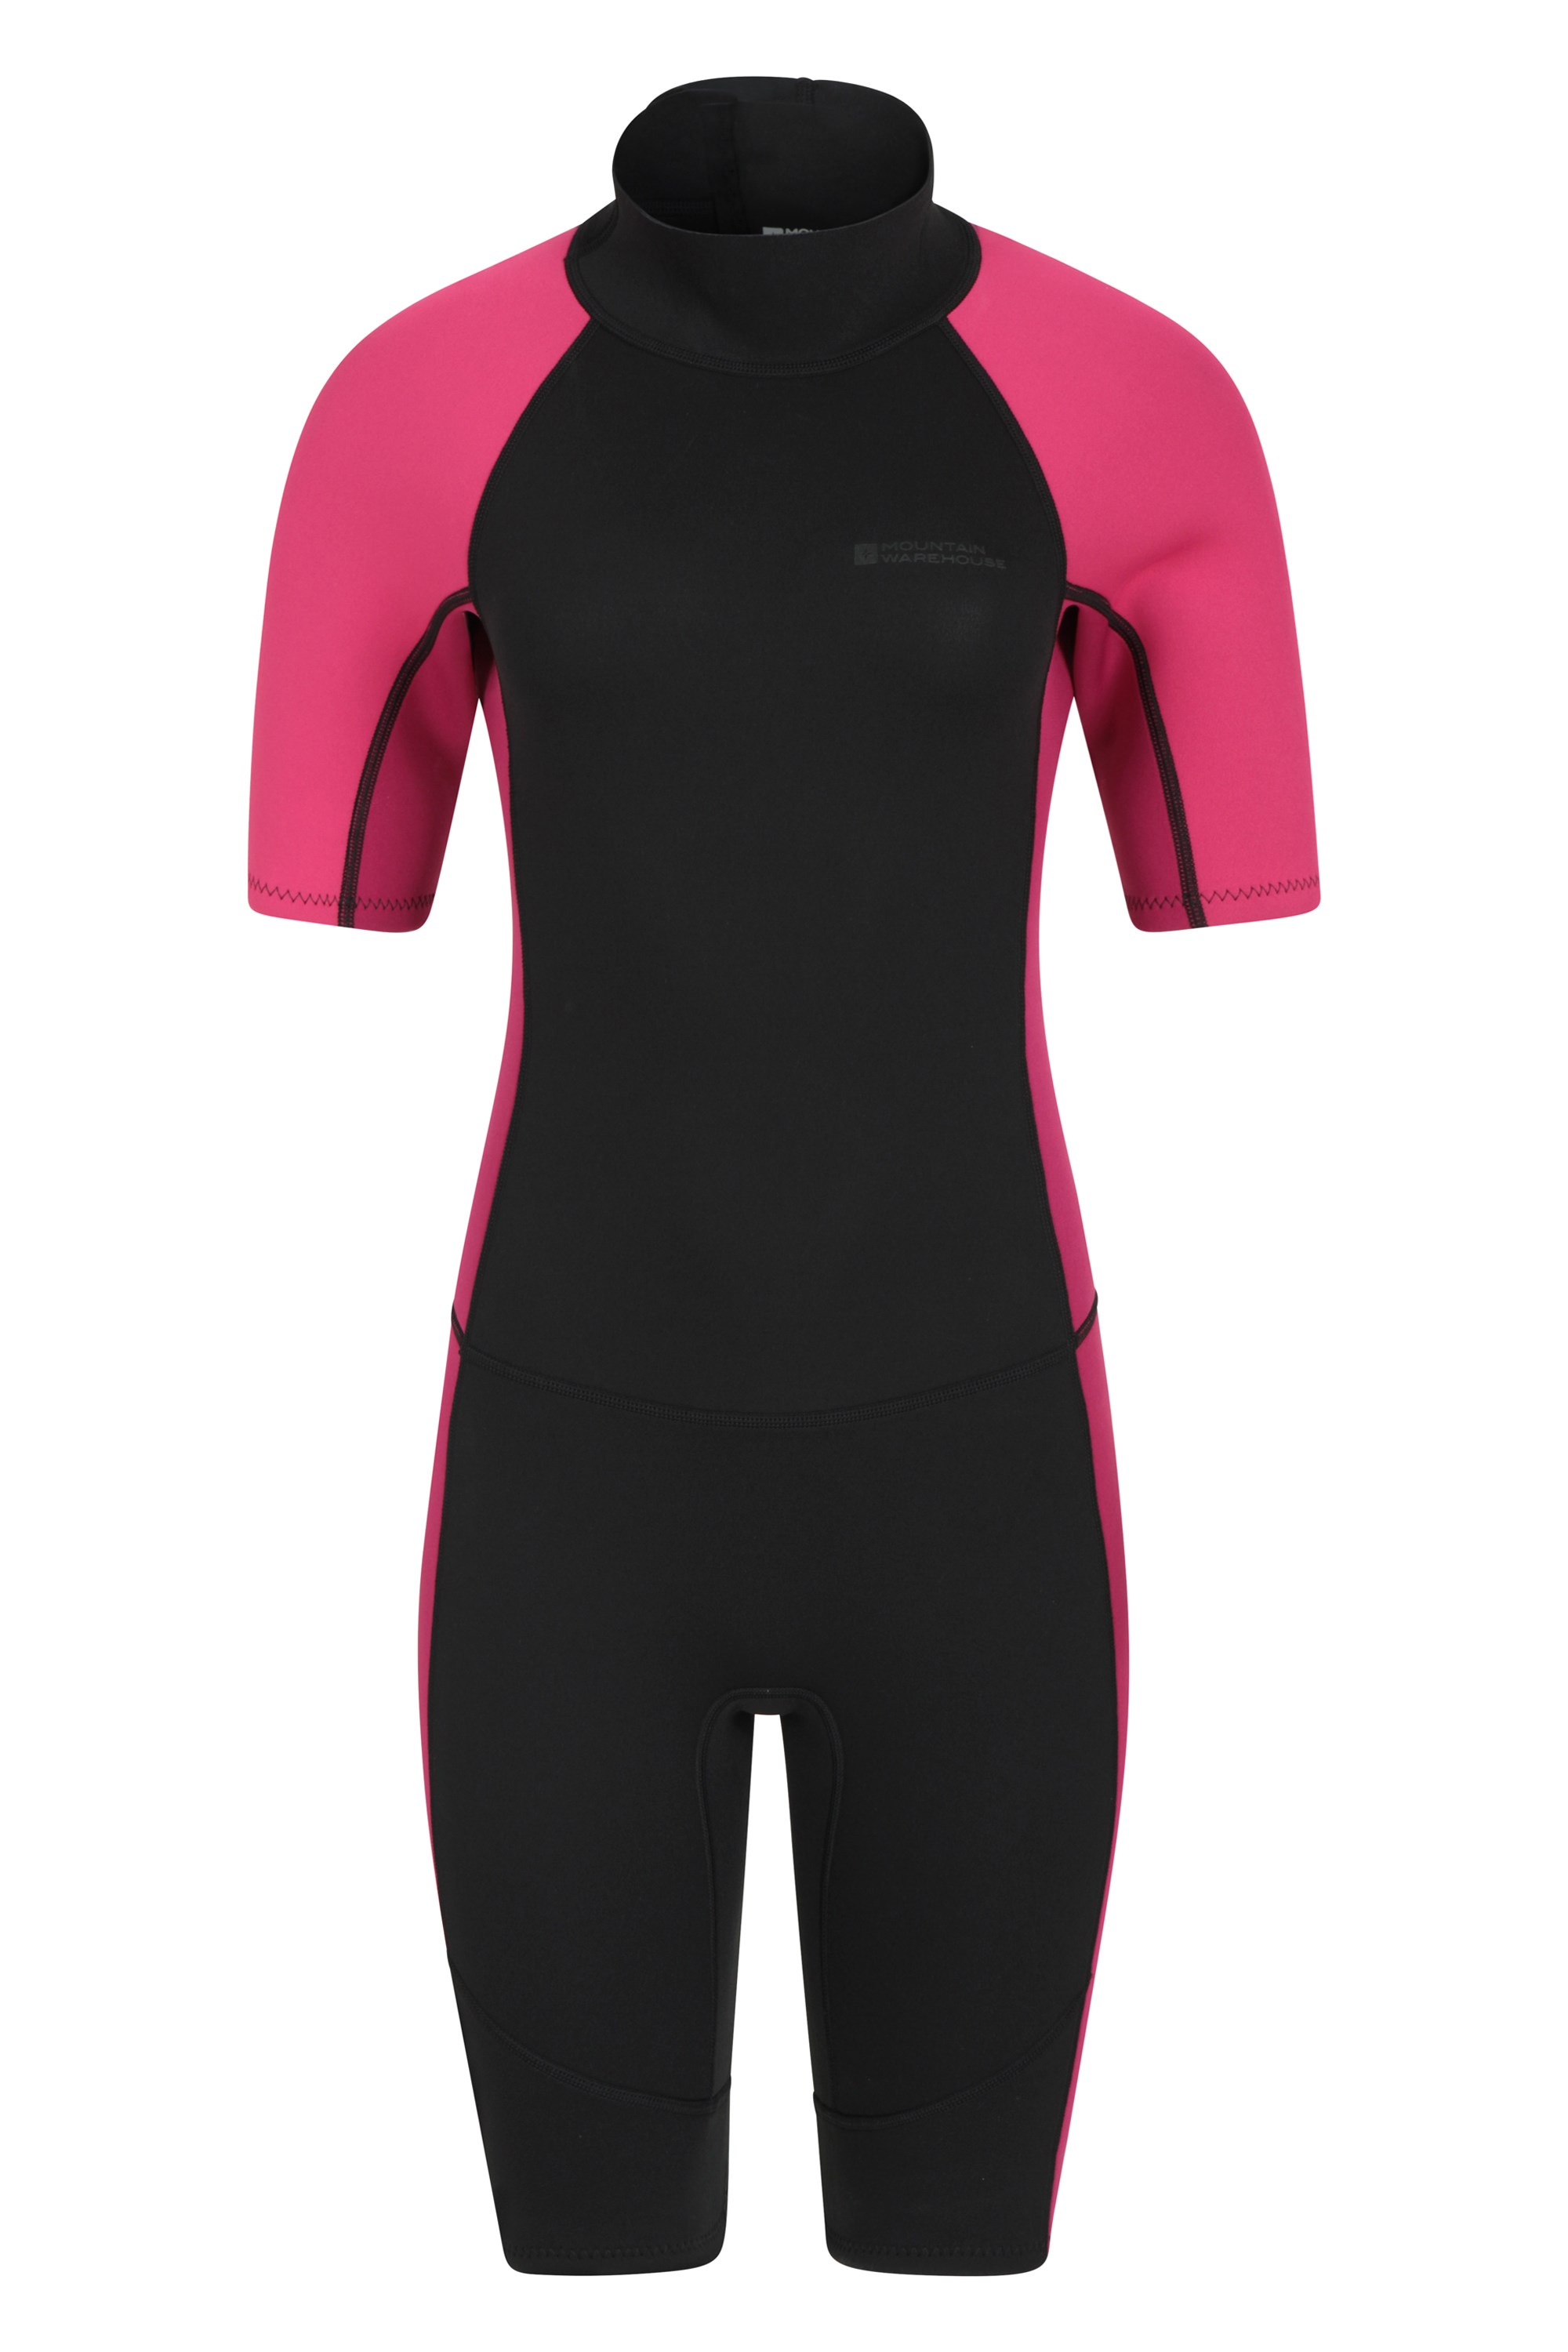 Shorty Womens 2. 5/2mm Wetsuit - Black